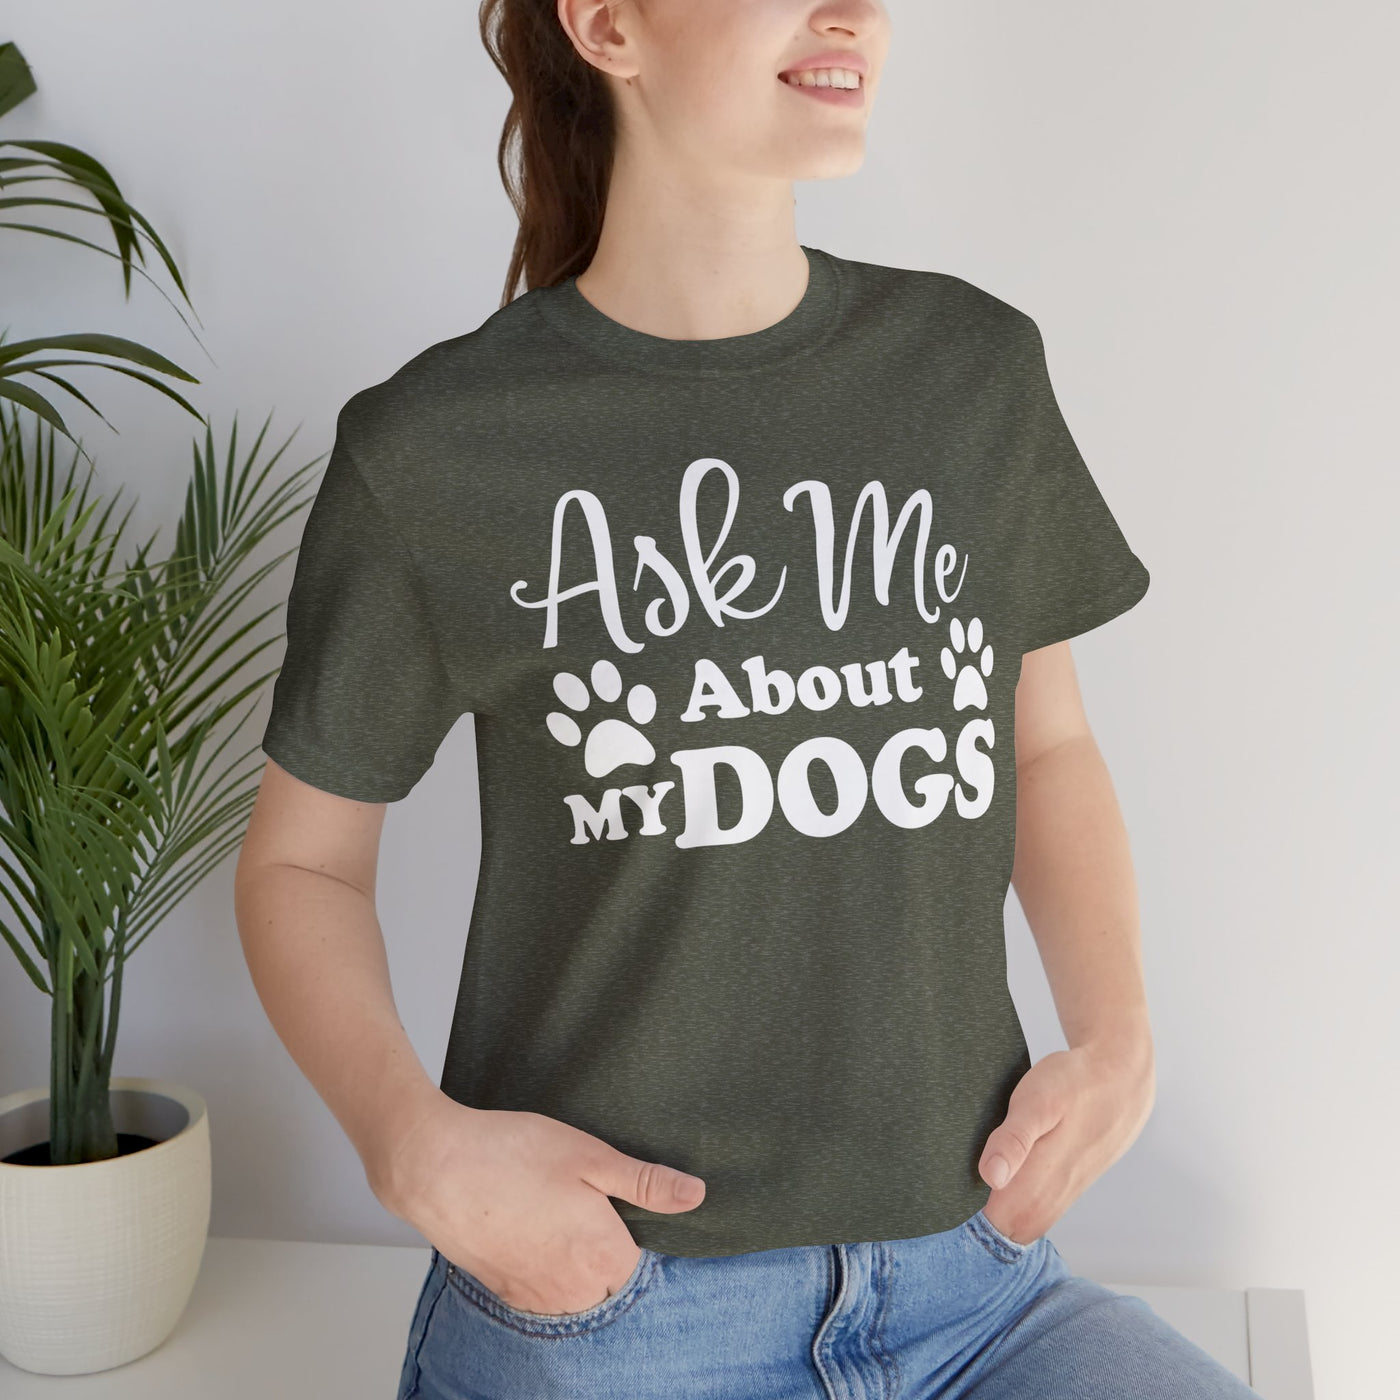 Ask Me About My Dogs T-Shirt